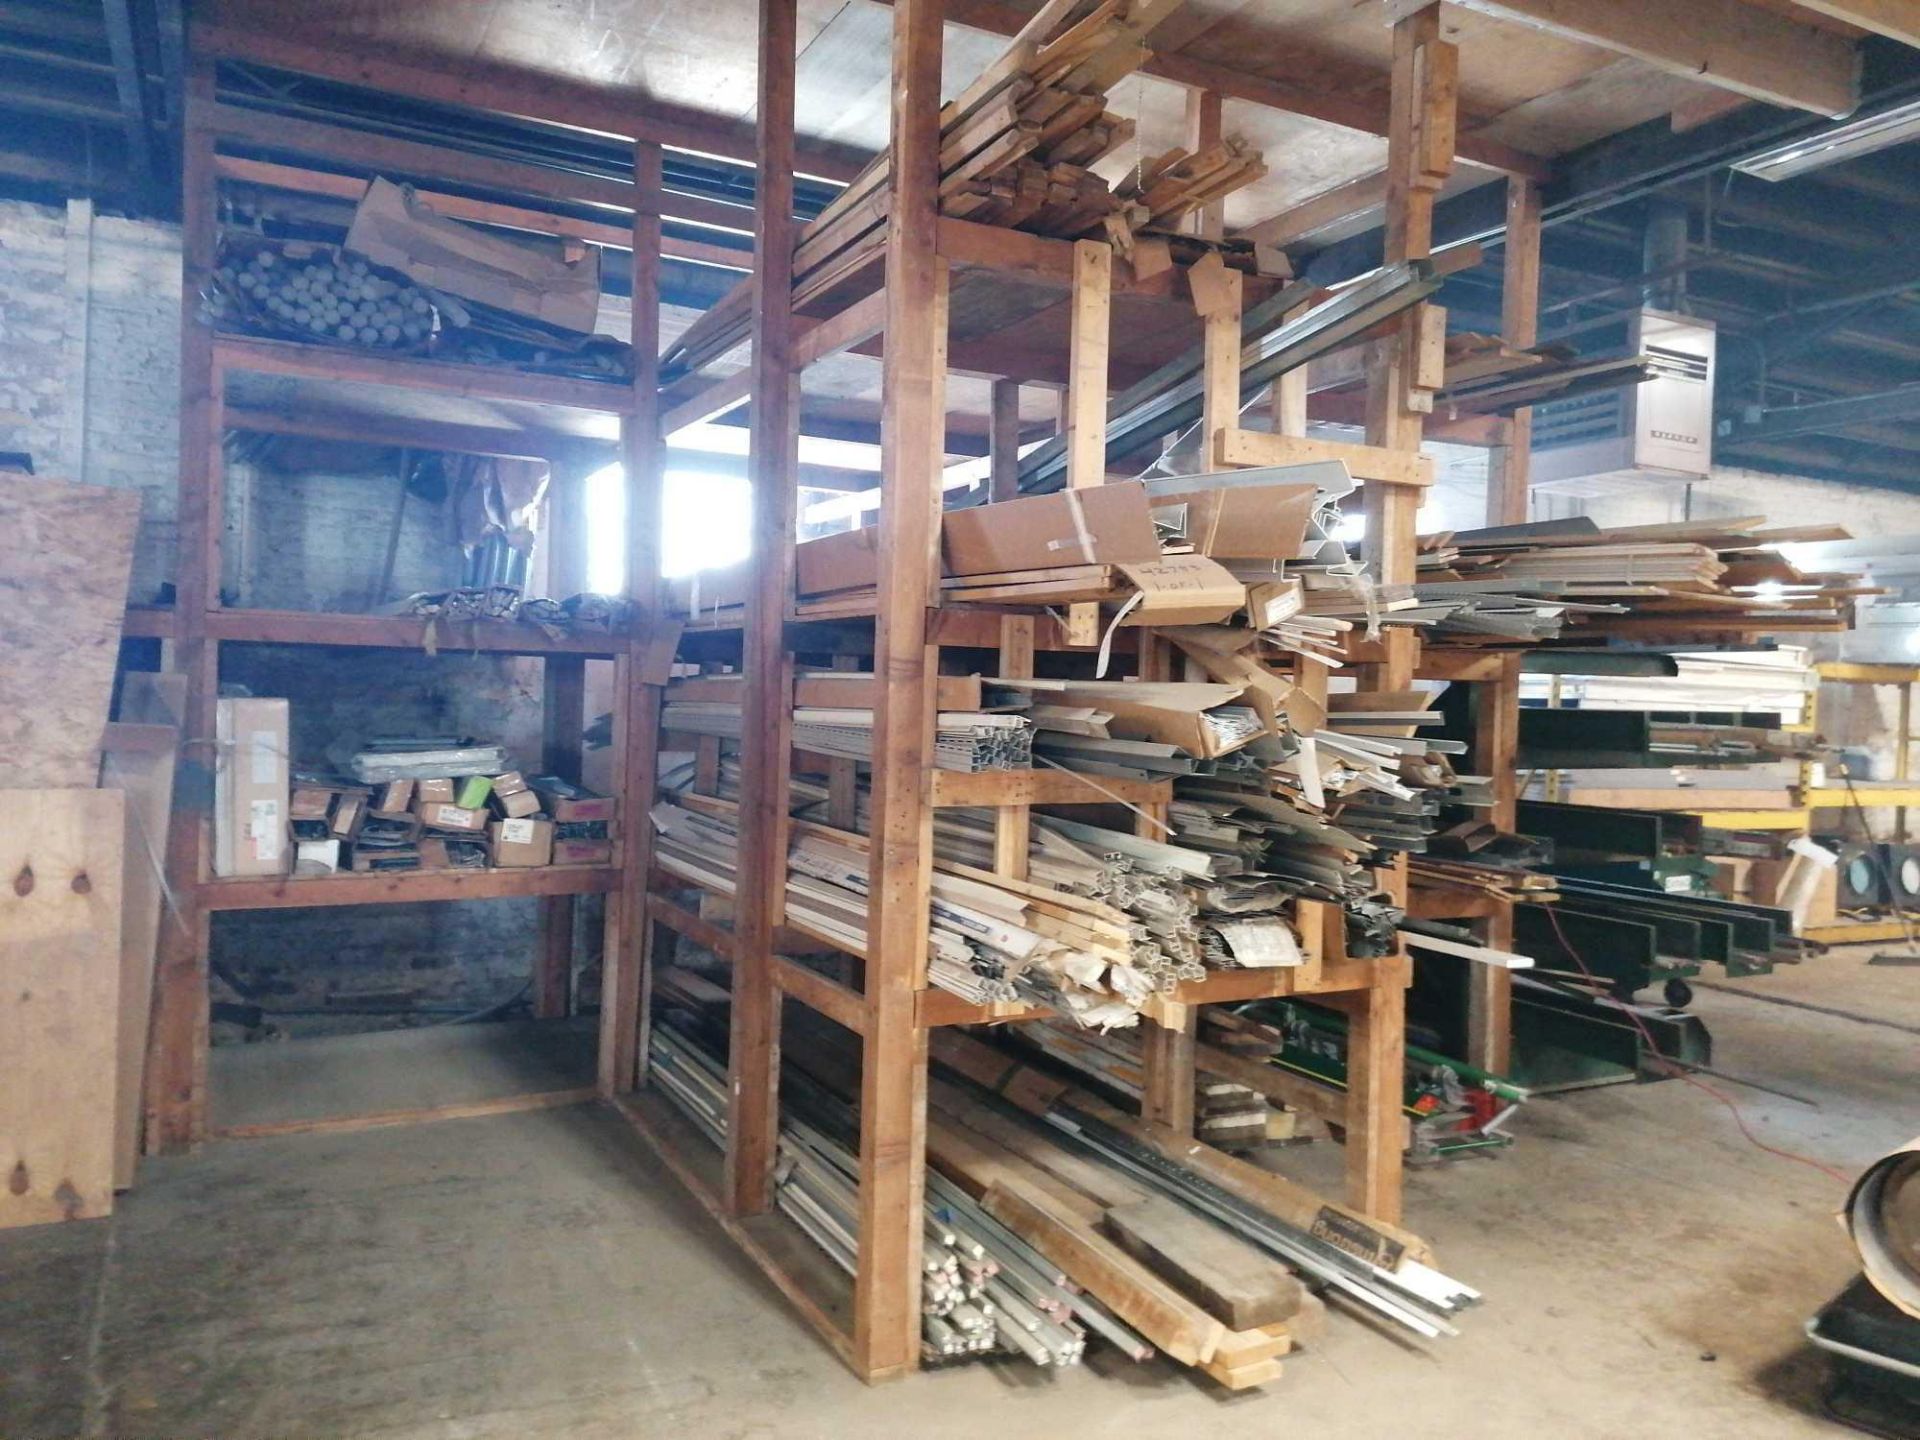 Shelves of Miscellaneous Wood, Metal, Sheeting - Image 9 of 9